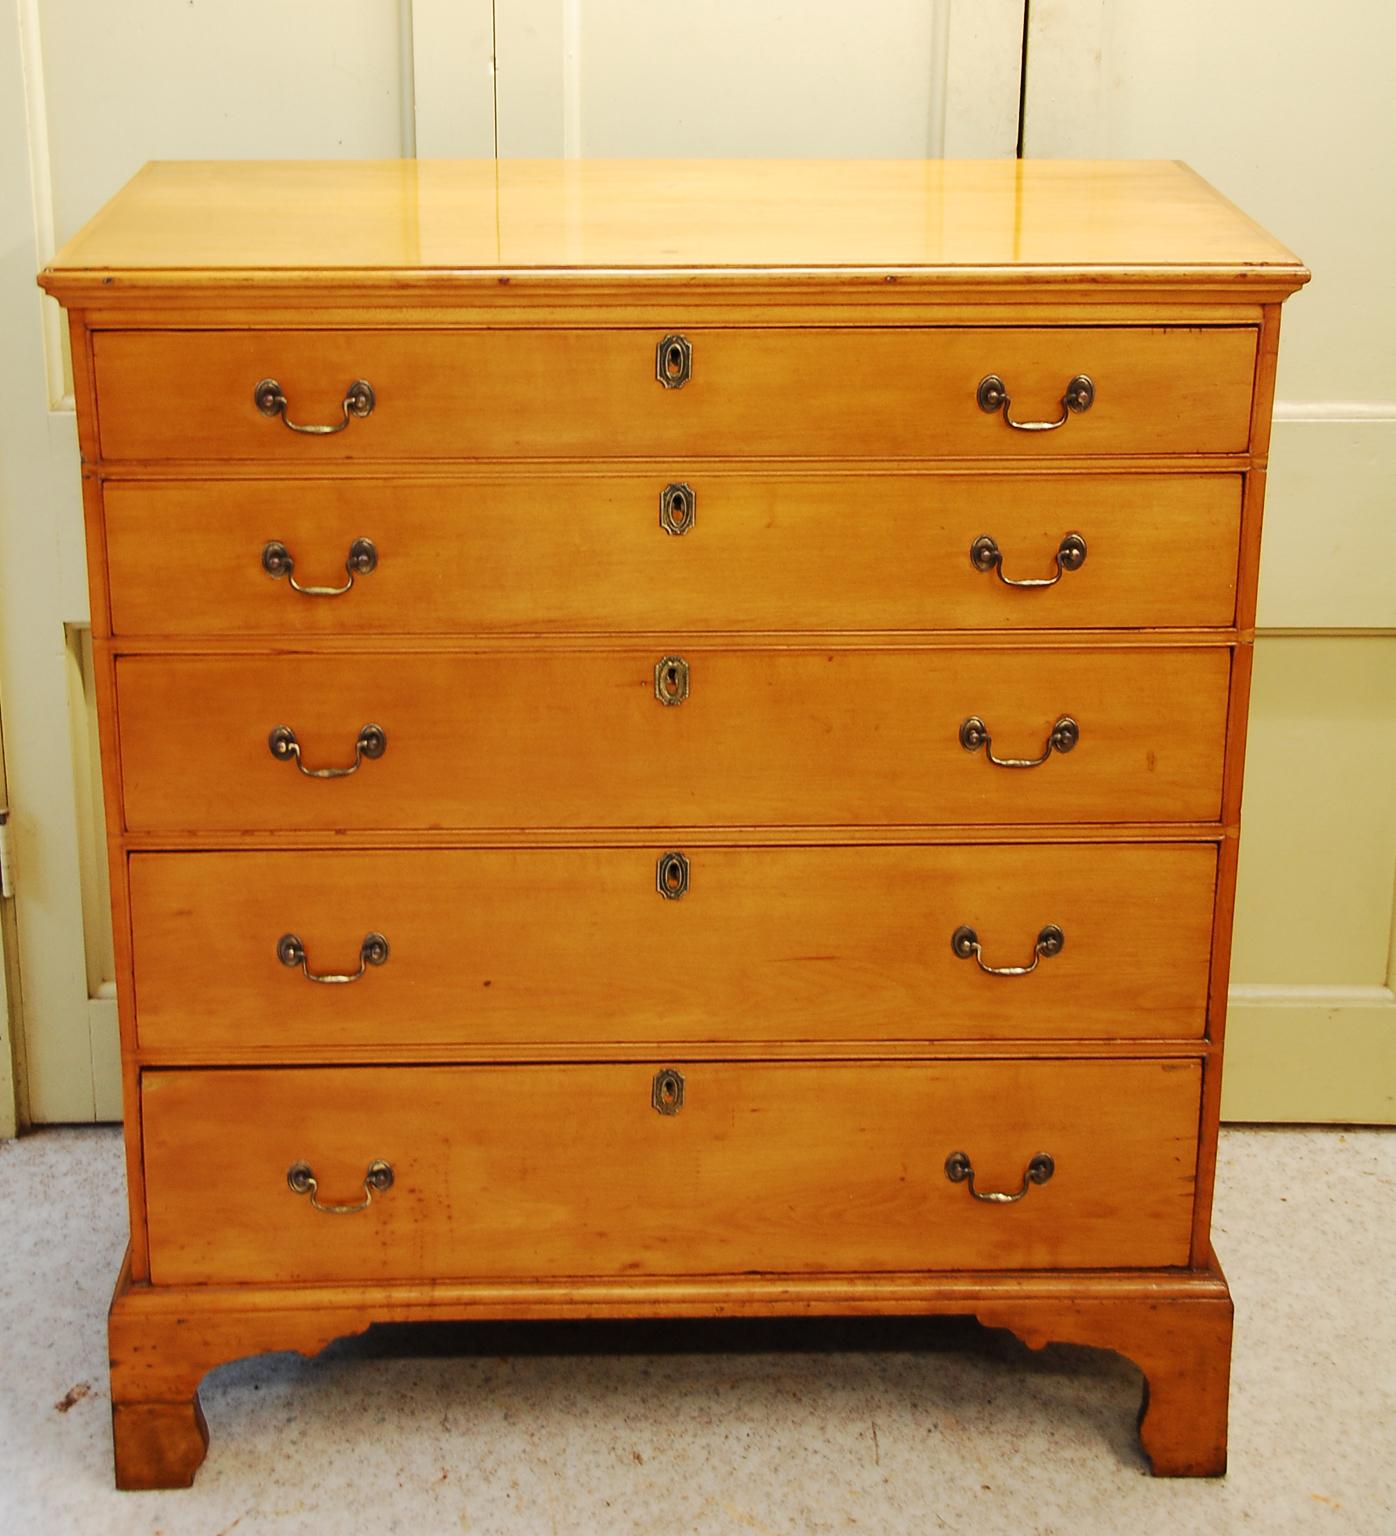 American Chippendale period Federal maple tall chest of five graduated drawers. This chest has a bracket base, dovetailed construction, molding around the opening for each drawer (instead of on the drawer itself), and molded top. New England origin.